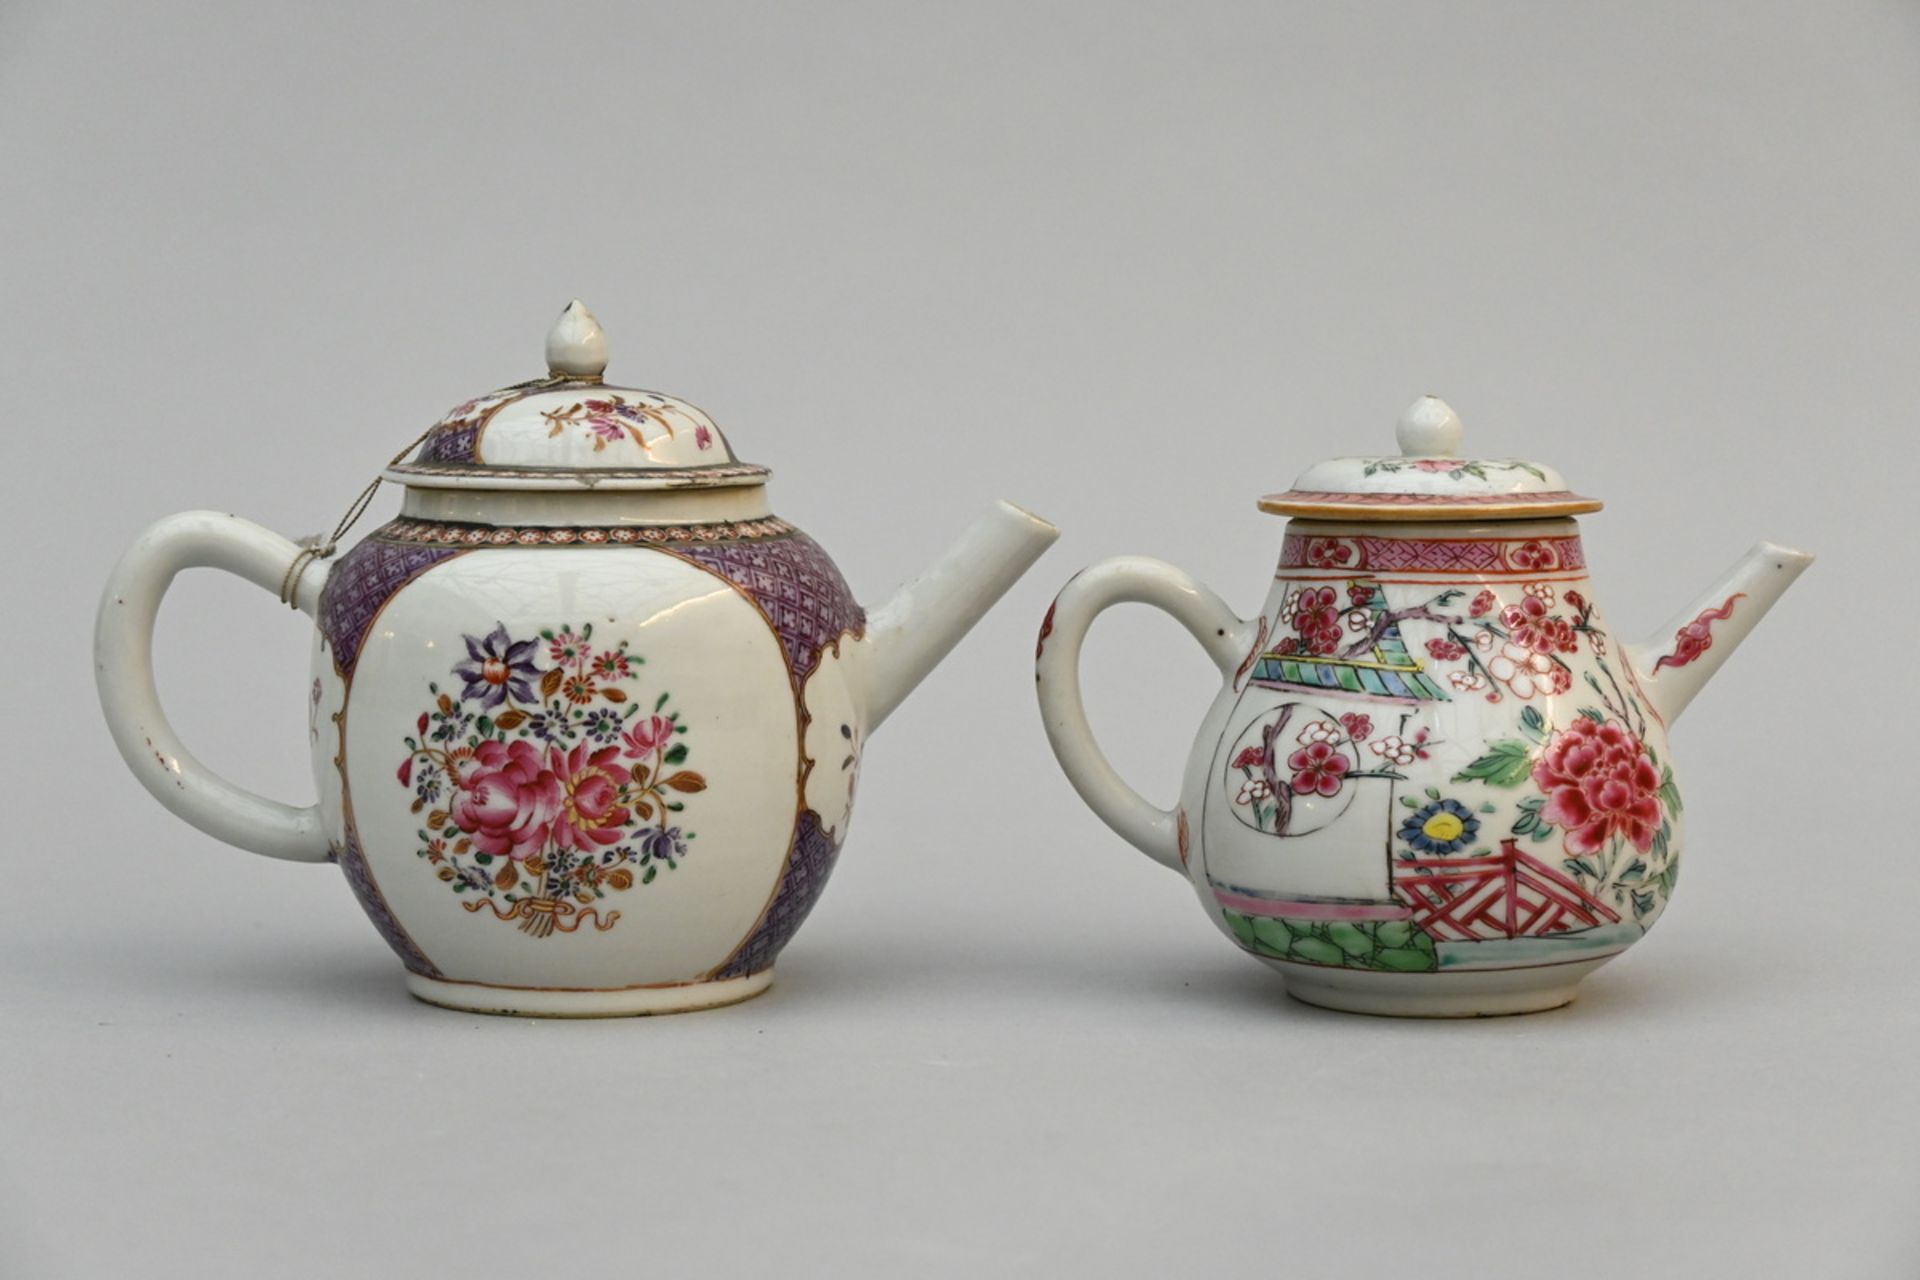 Two teapots in Chinese porcelain 'flowers', 18th century (14.5x12cm) (*)